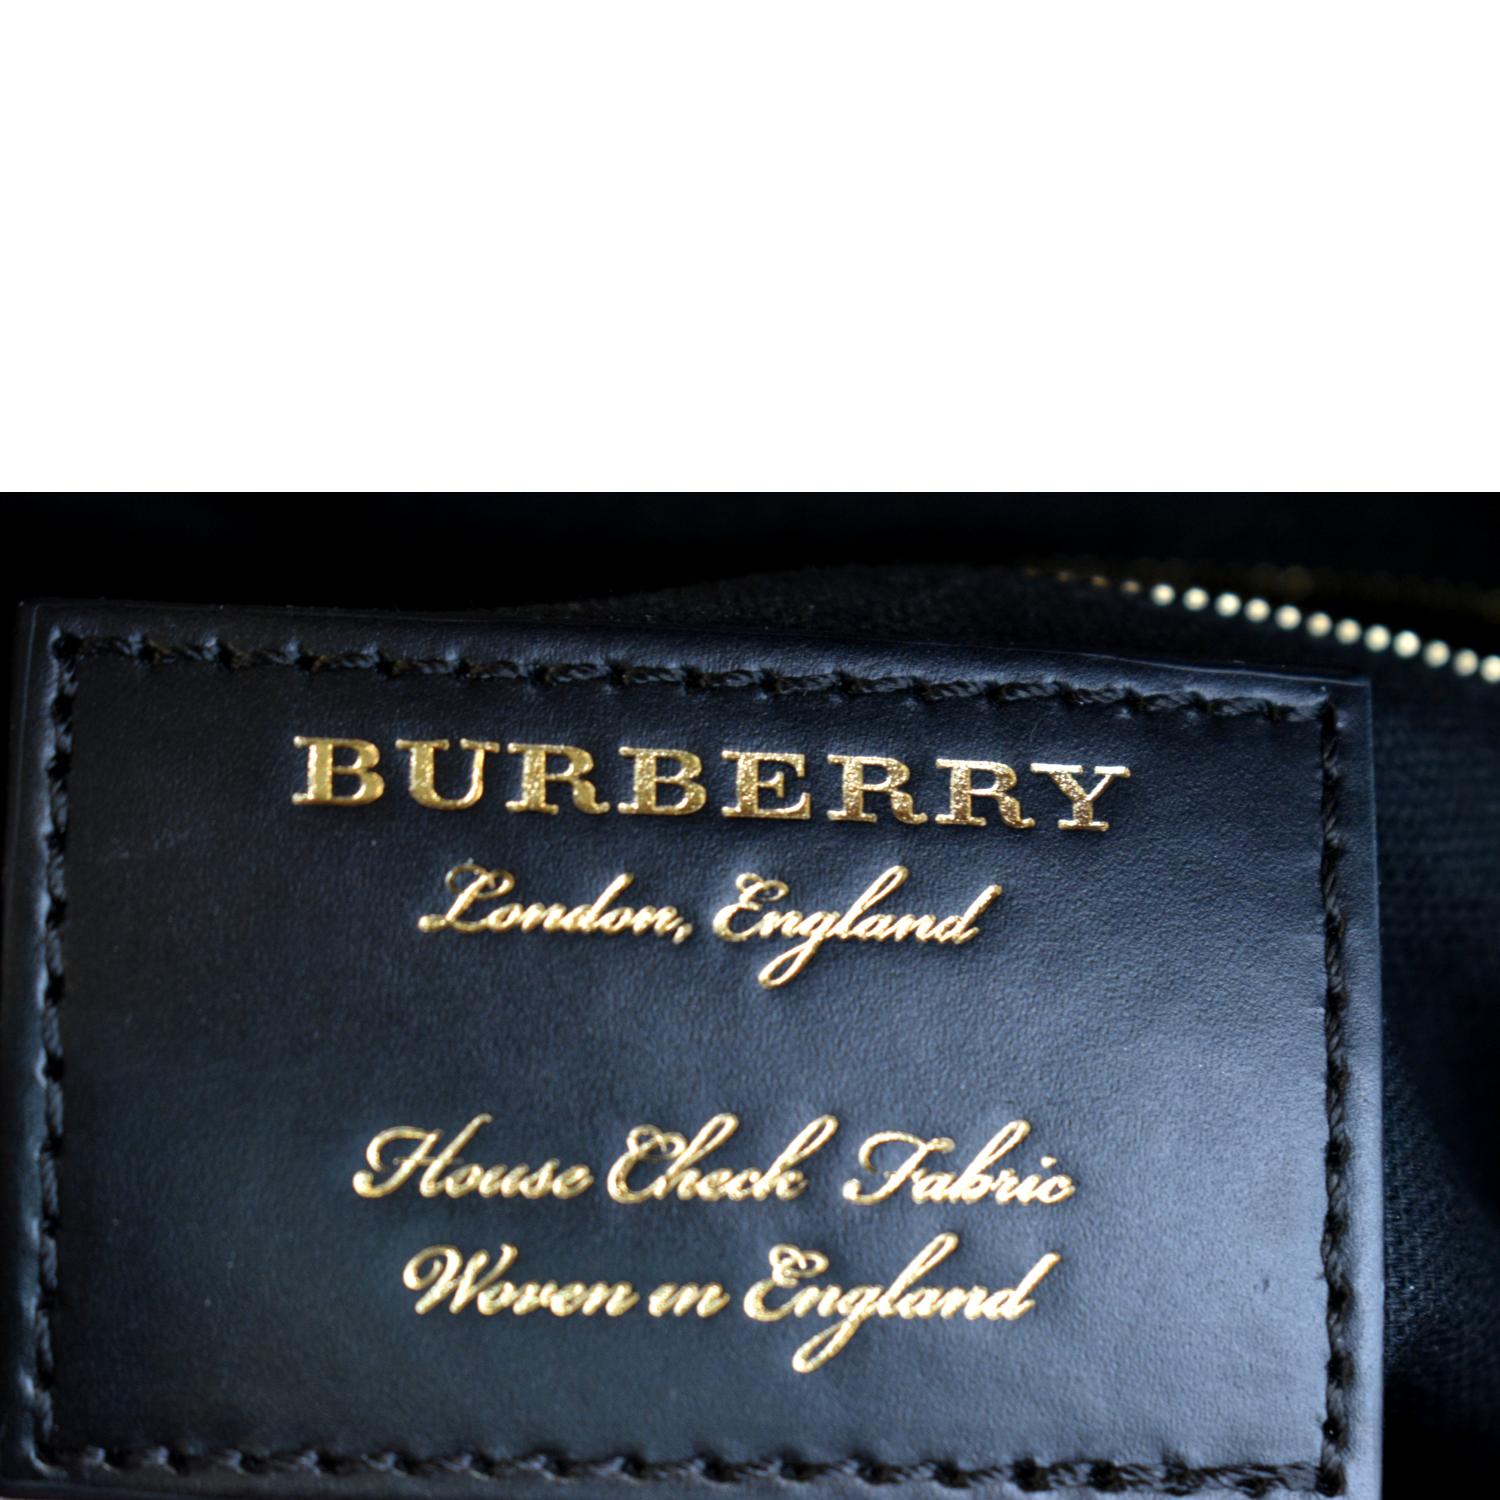 NWT $1790 Burberry Banner Tote House Check Derby Shoulder Bag Black 8068549  IT